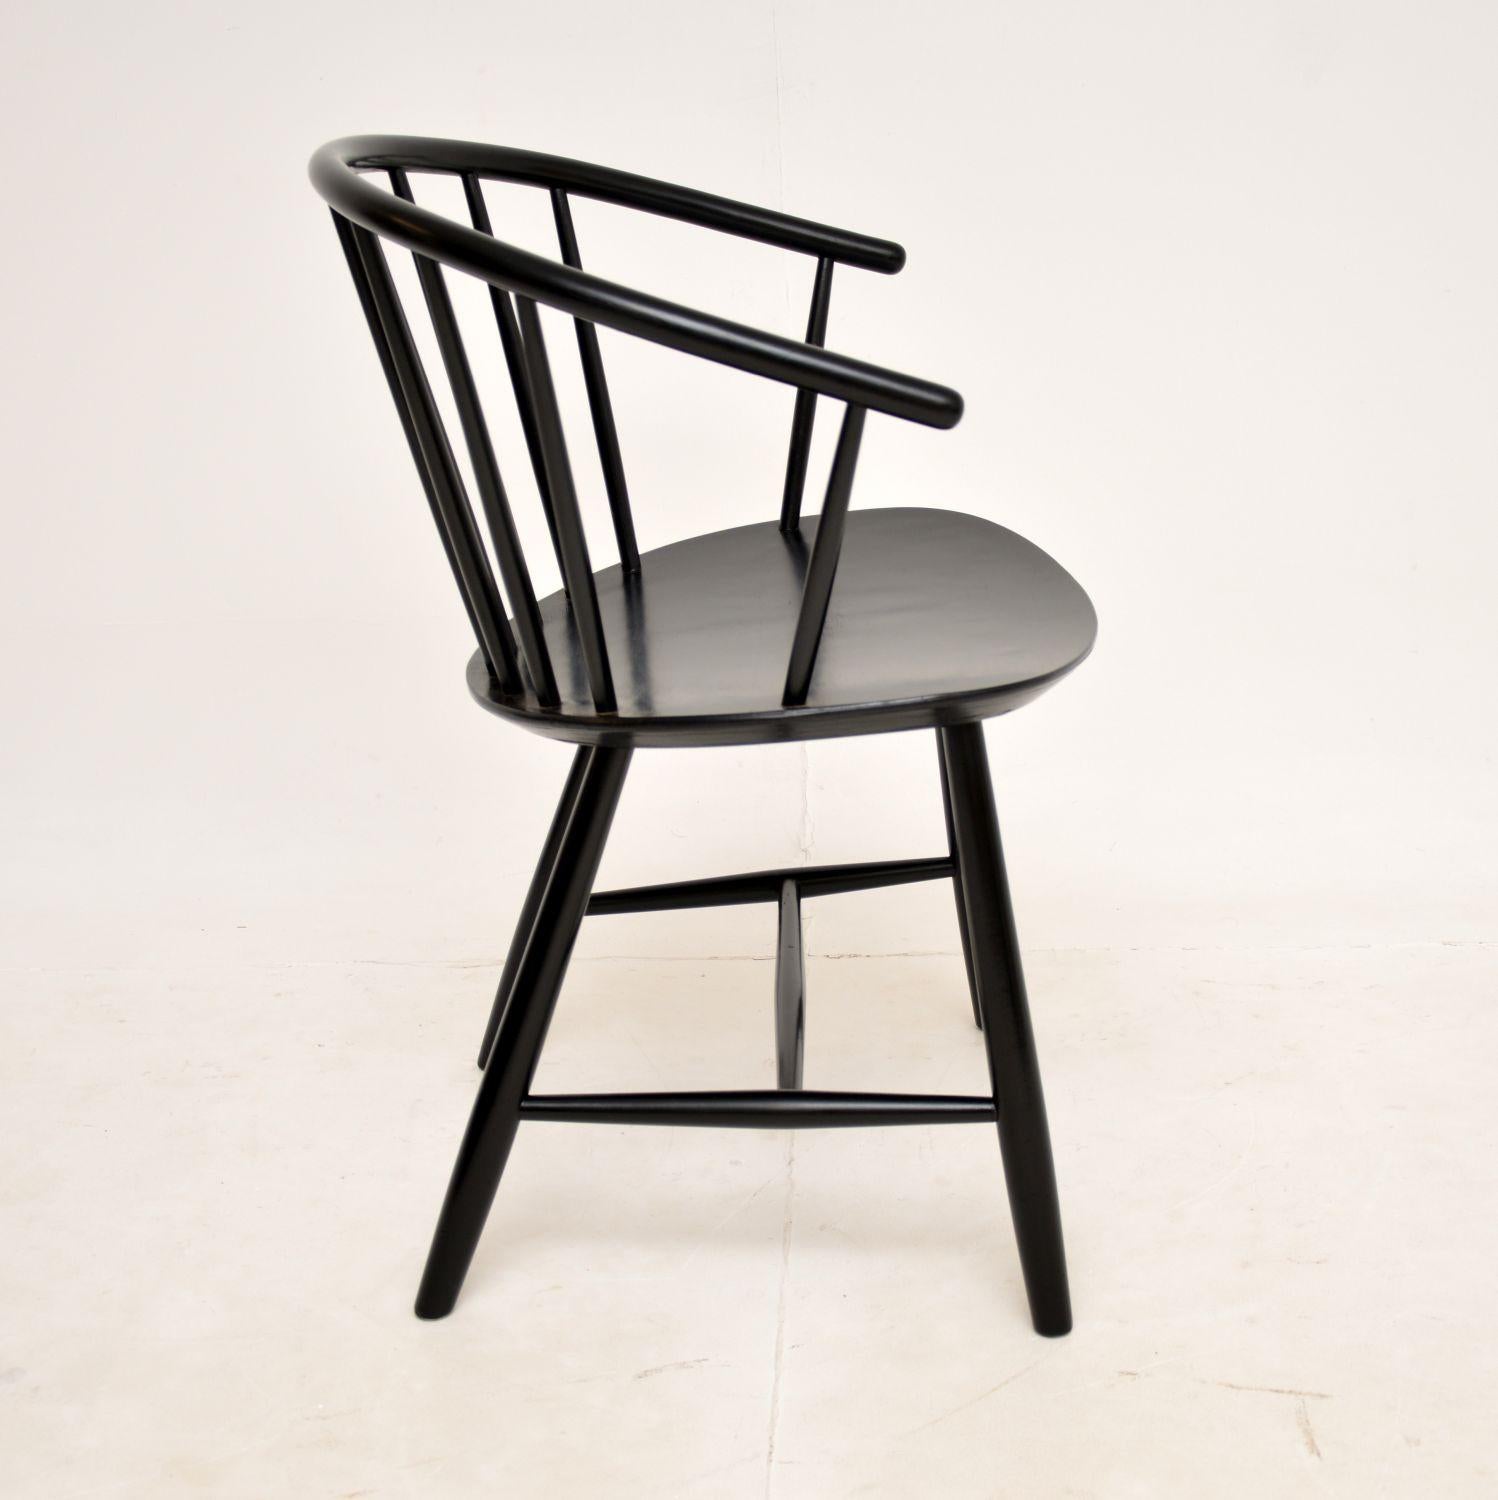 A lovely vintage ebonised armchair, made in Denmark by Fredericia and dating from around the 1970-80’s. It was designed by Ejvind Johansson.

This is of amazing quality and is a very useful size. It would be perfect in various settings as an